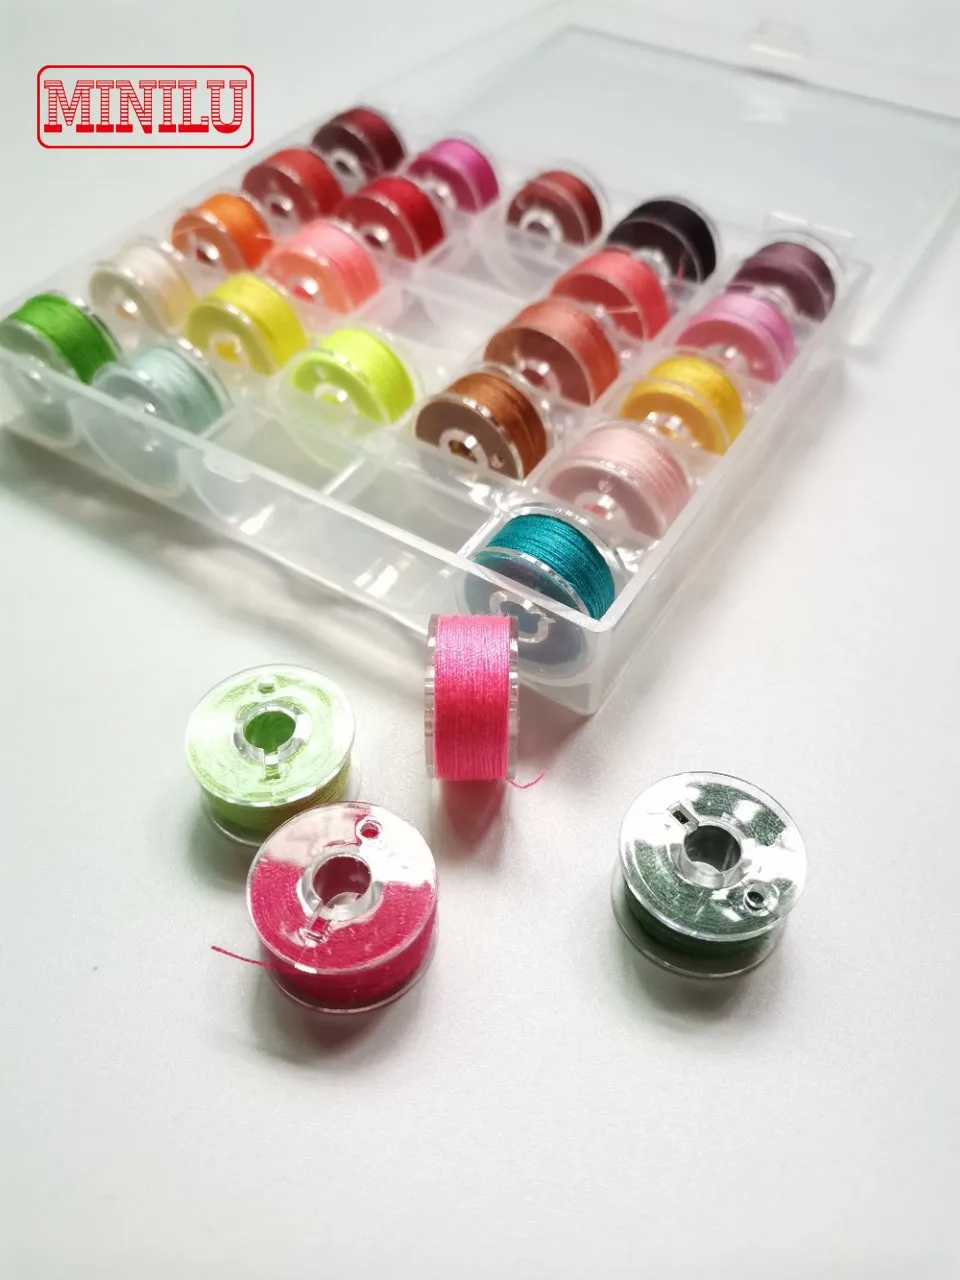 

25pcs/Box Spools Sewing Thread Bobbins Knitting Dyed Polyester Upper Threads DIY Sewing Machine Accessories White Black Colorful